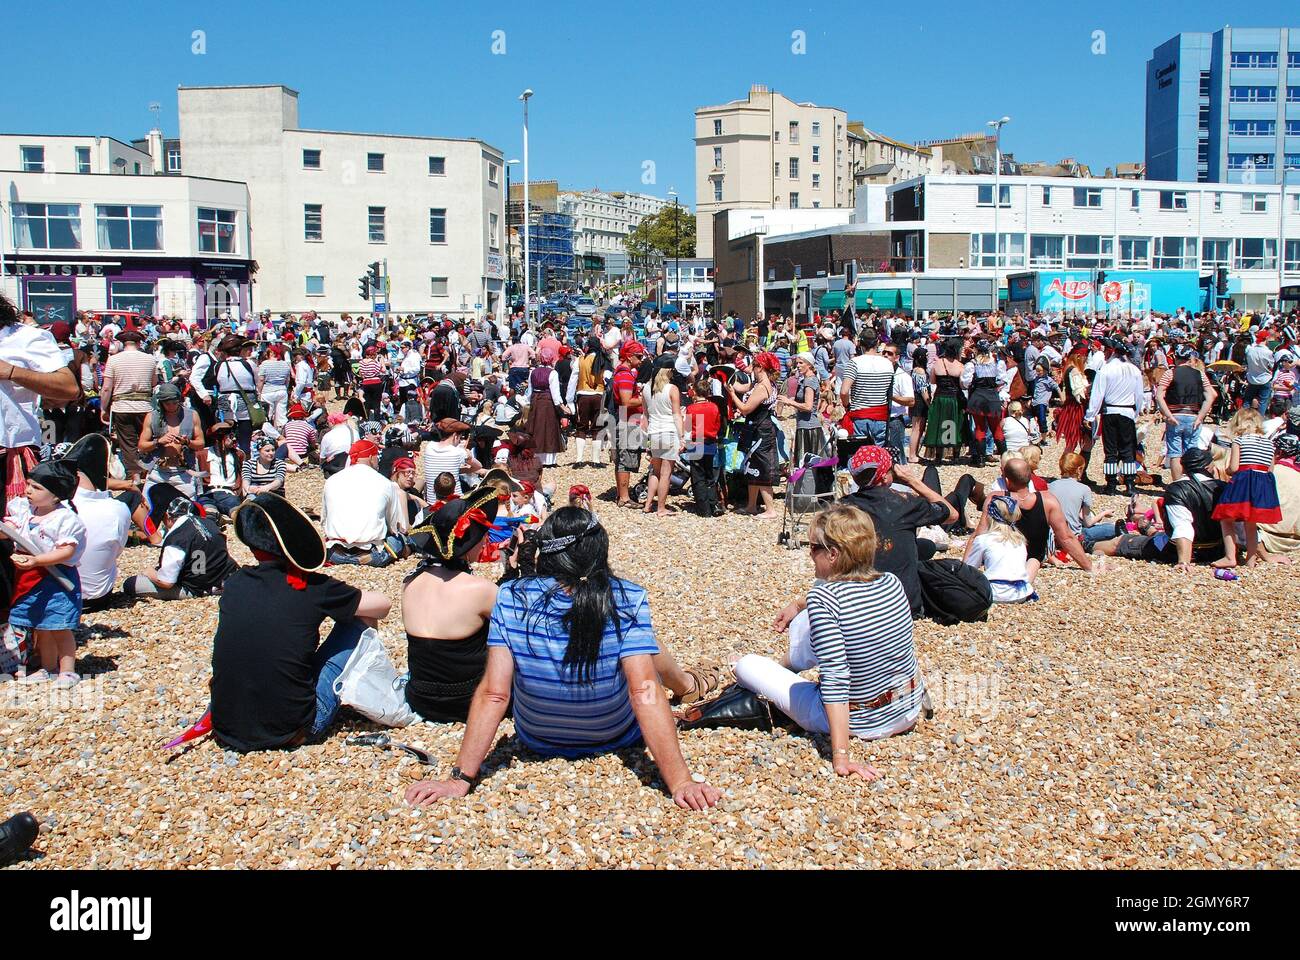 People dressed as pirates take part in the Pirate Day event on the beach at Hastings in East Sussex, England on July 22, 2012. Started in 2009, it was an attempt to win the Guinness World Record for the largest number of pirates gathered on the beach. Stock Photo